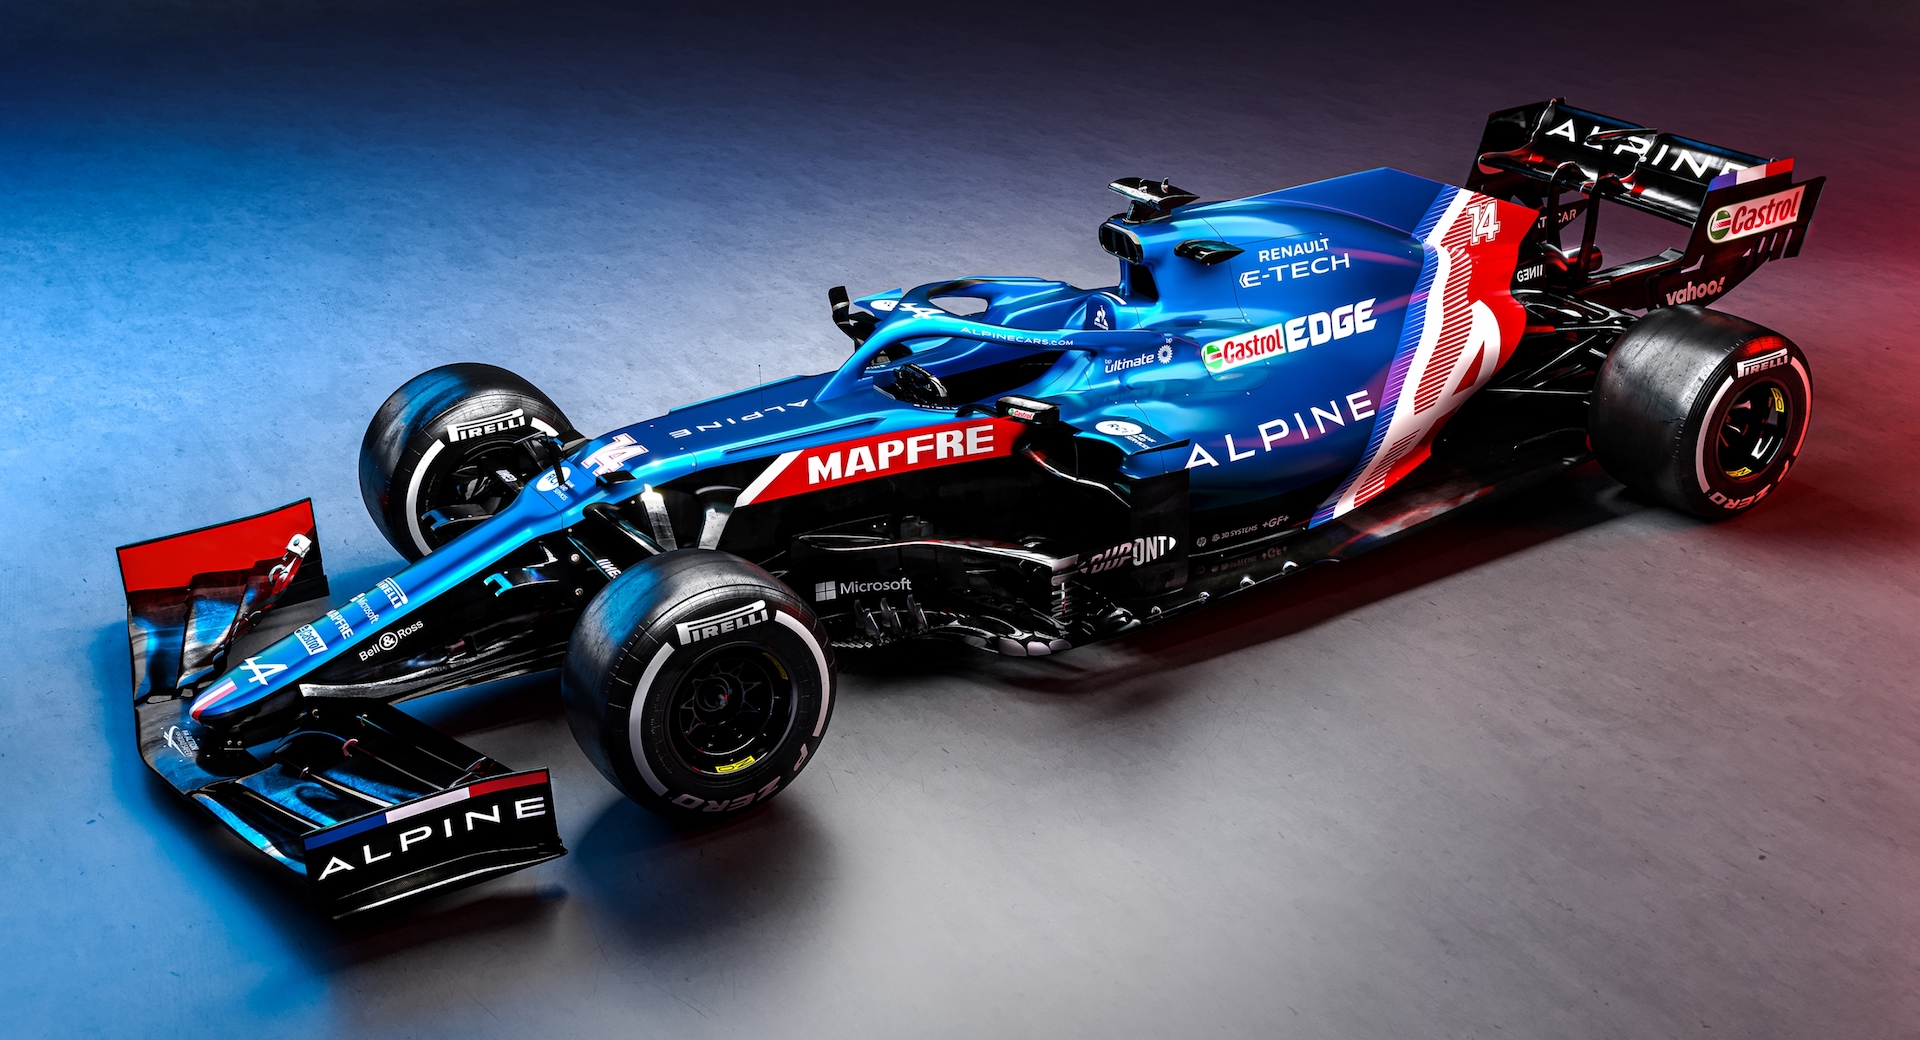 Renault Sport has changed its name to Alpine